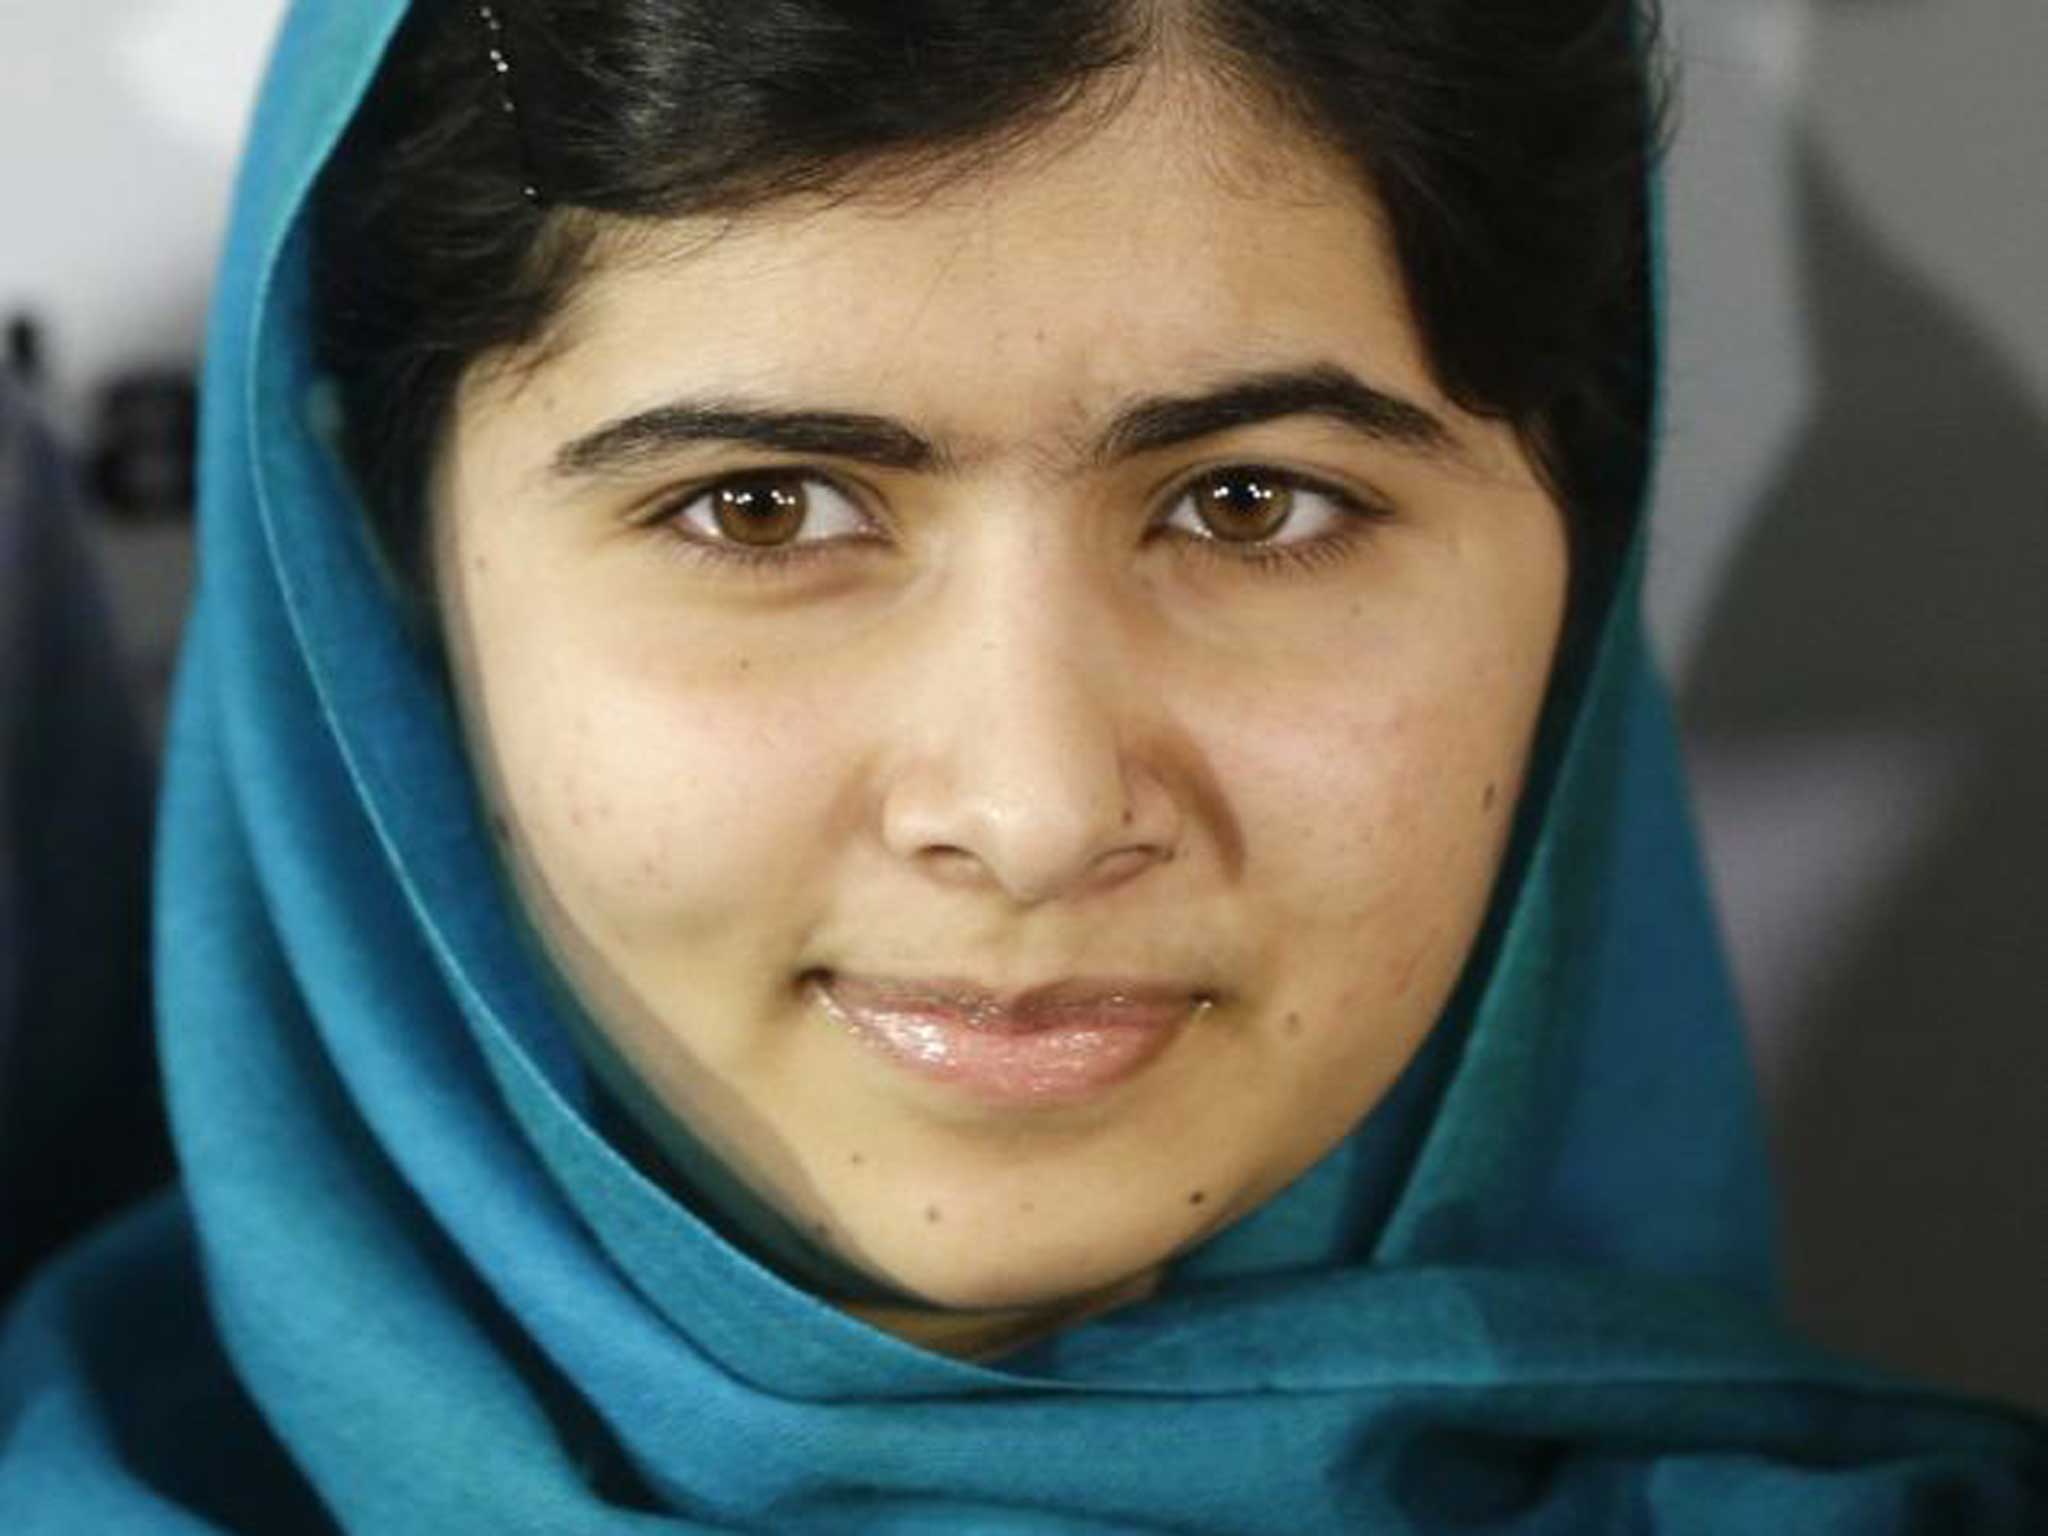 World acclaim: Malala’s autobiography has been hailed outside her native Pakistan, where the Taliban threatens to attack shops that stock it